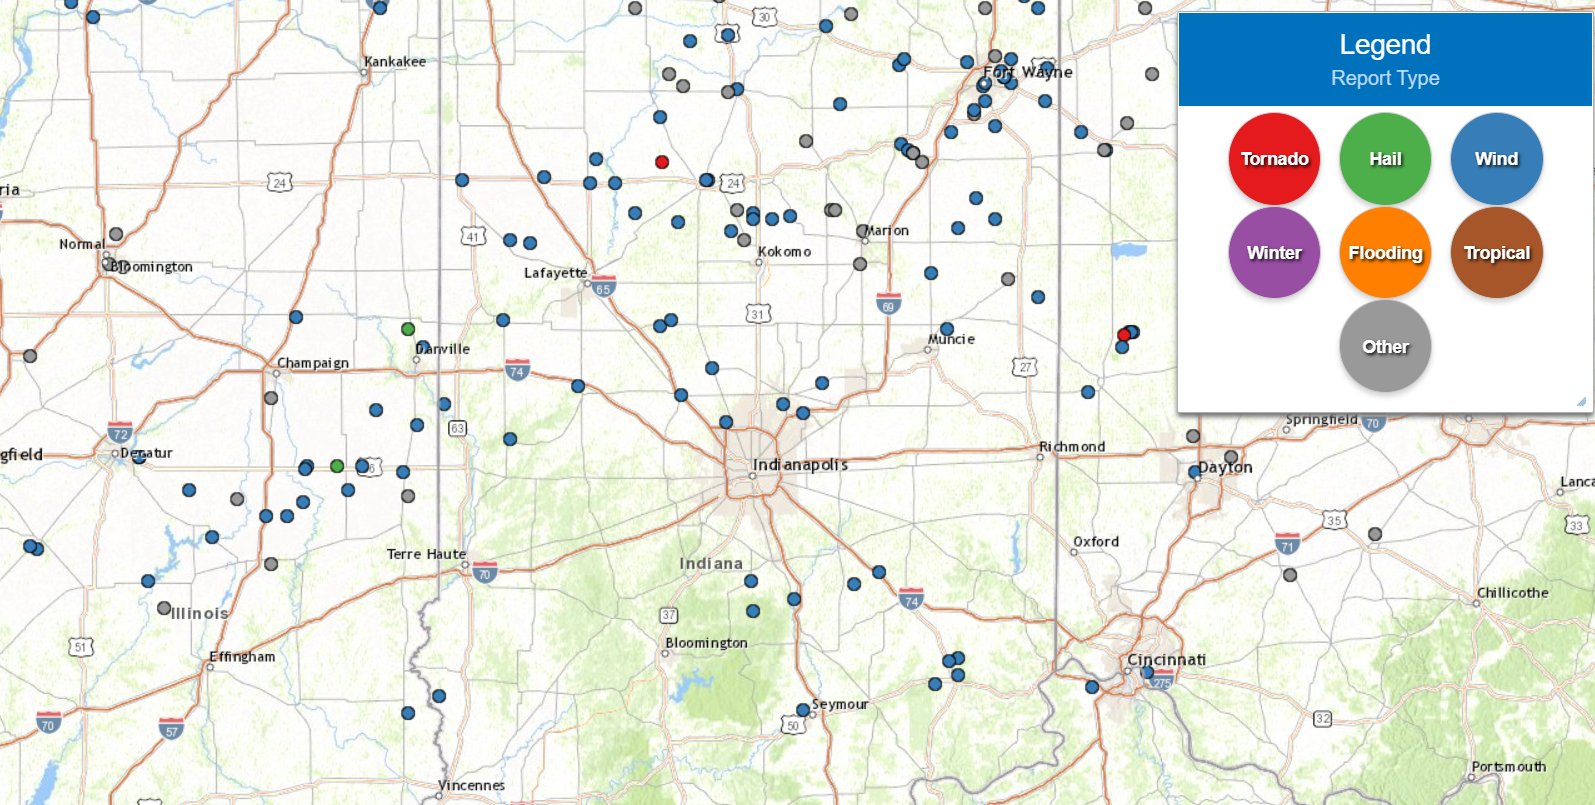 Map of Storm Reports